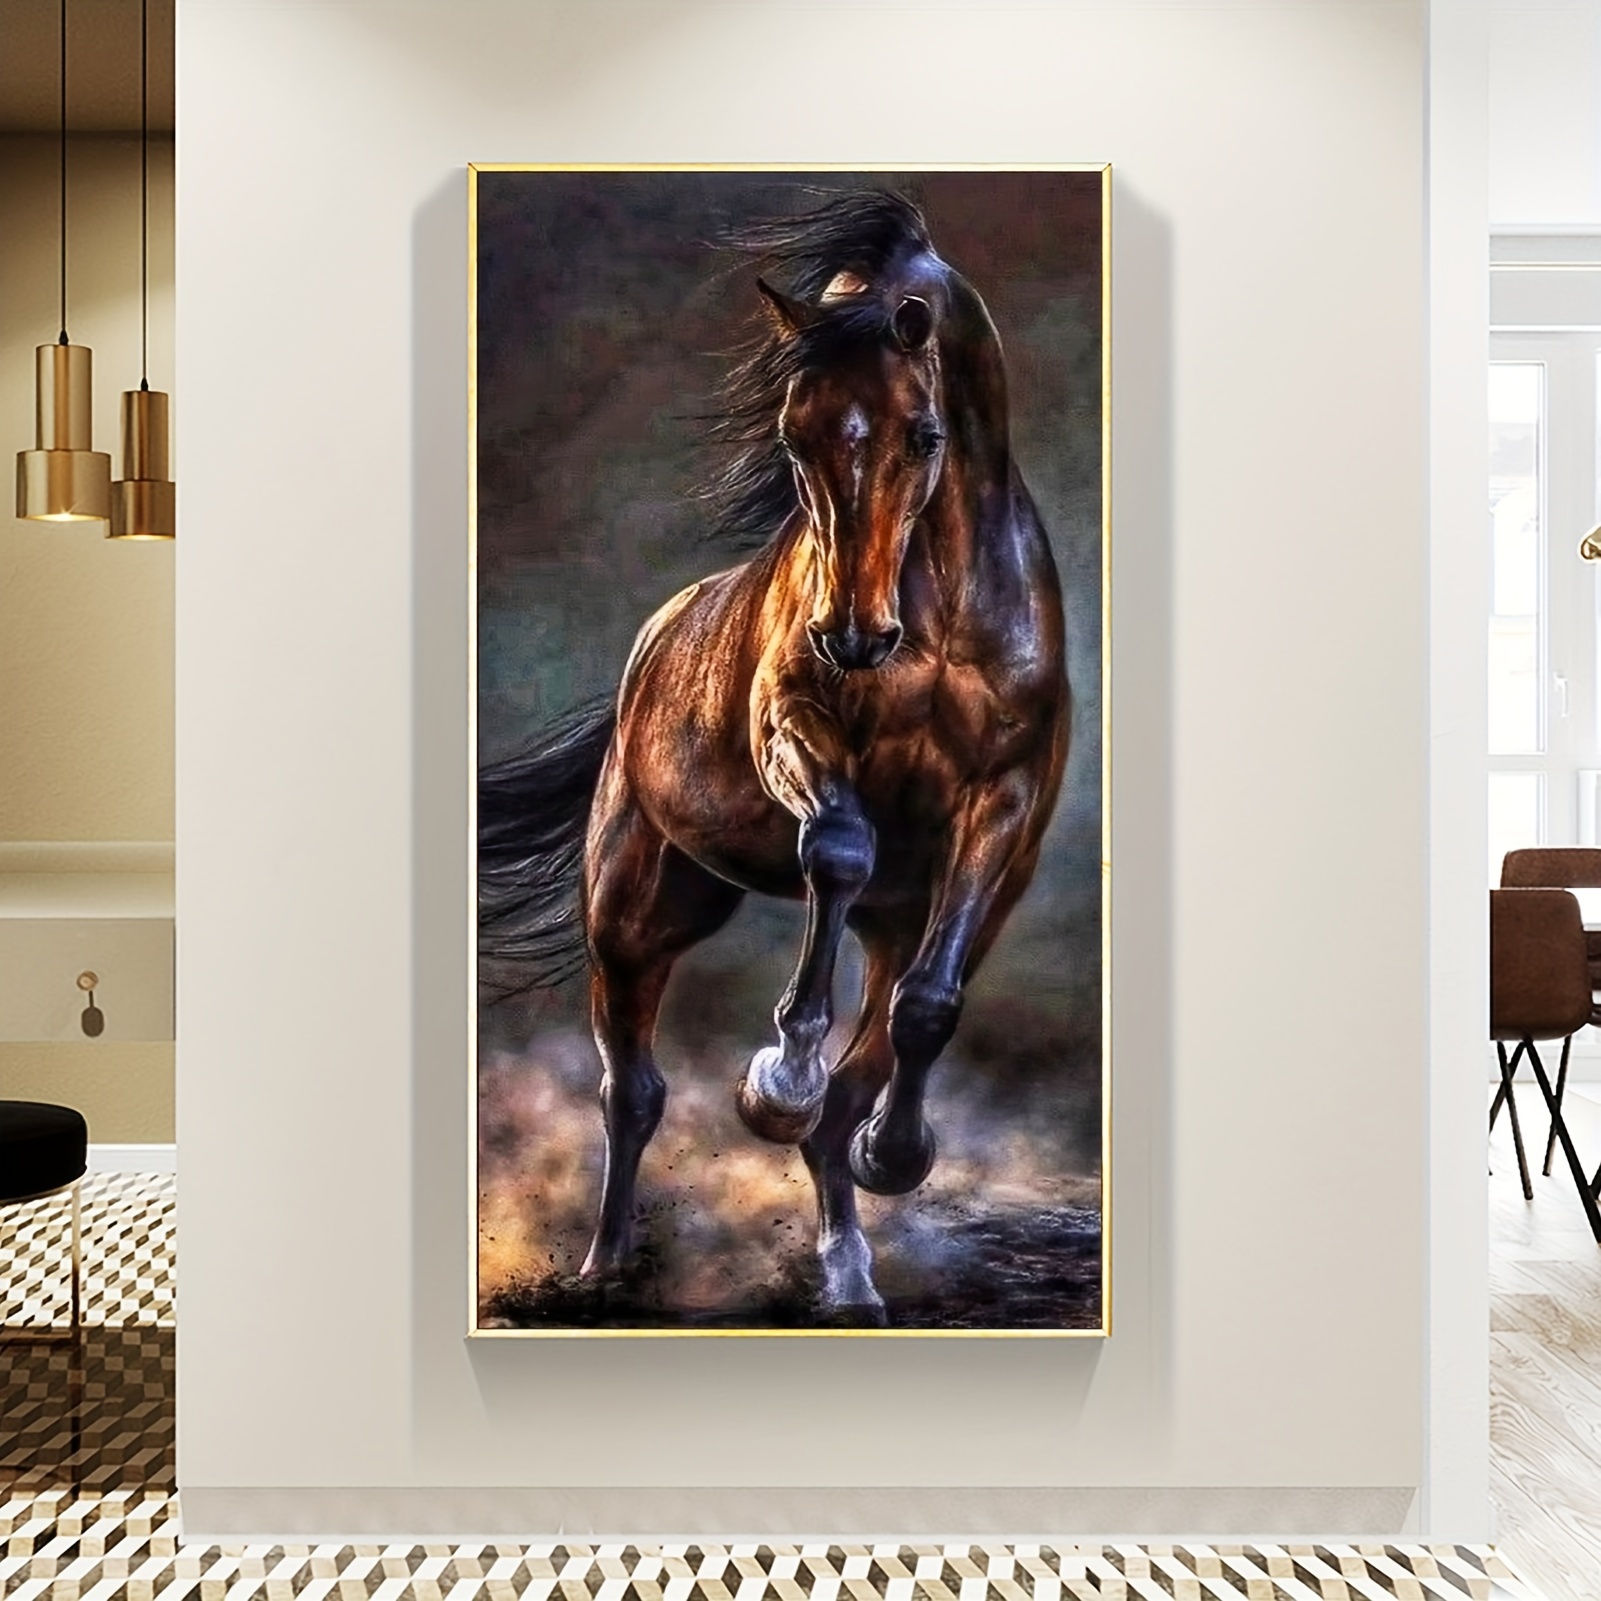 Other Wall Decorative Diy Horse Diamond Painting Kits For Adults